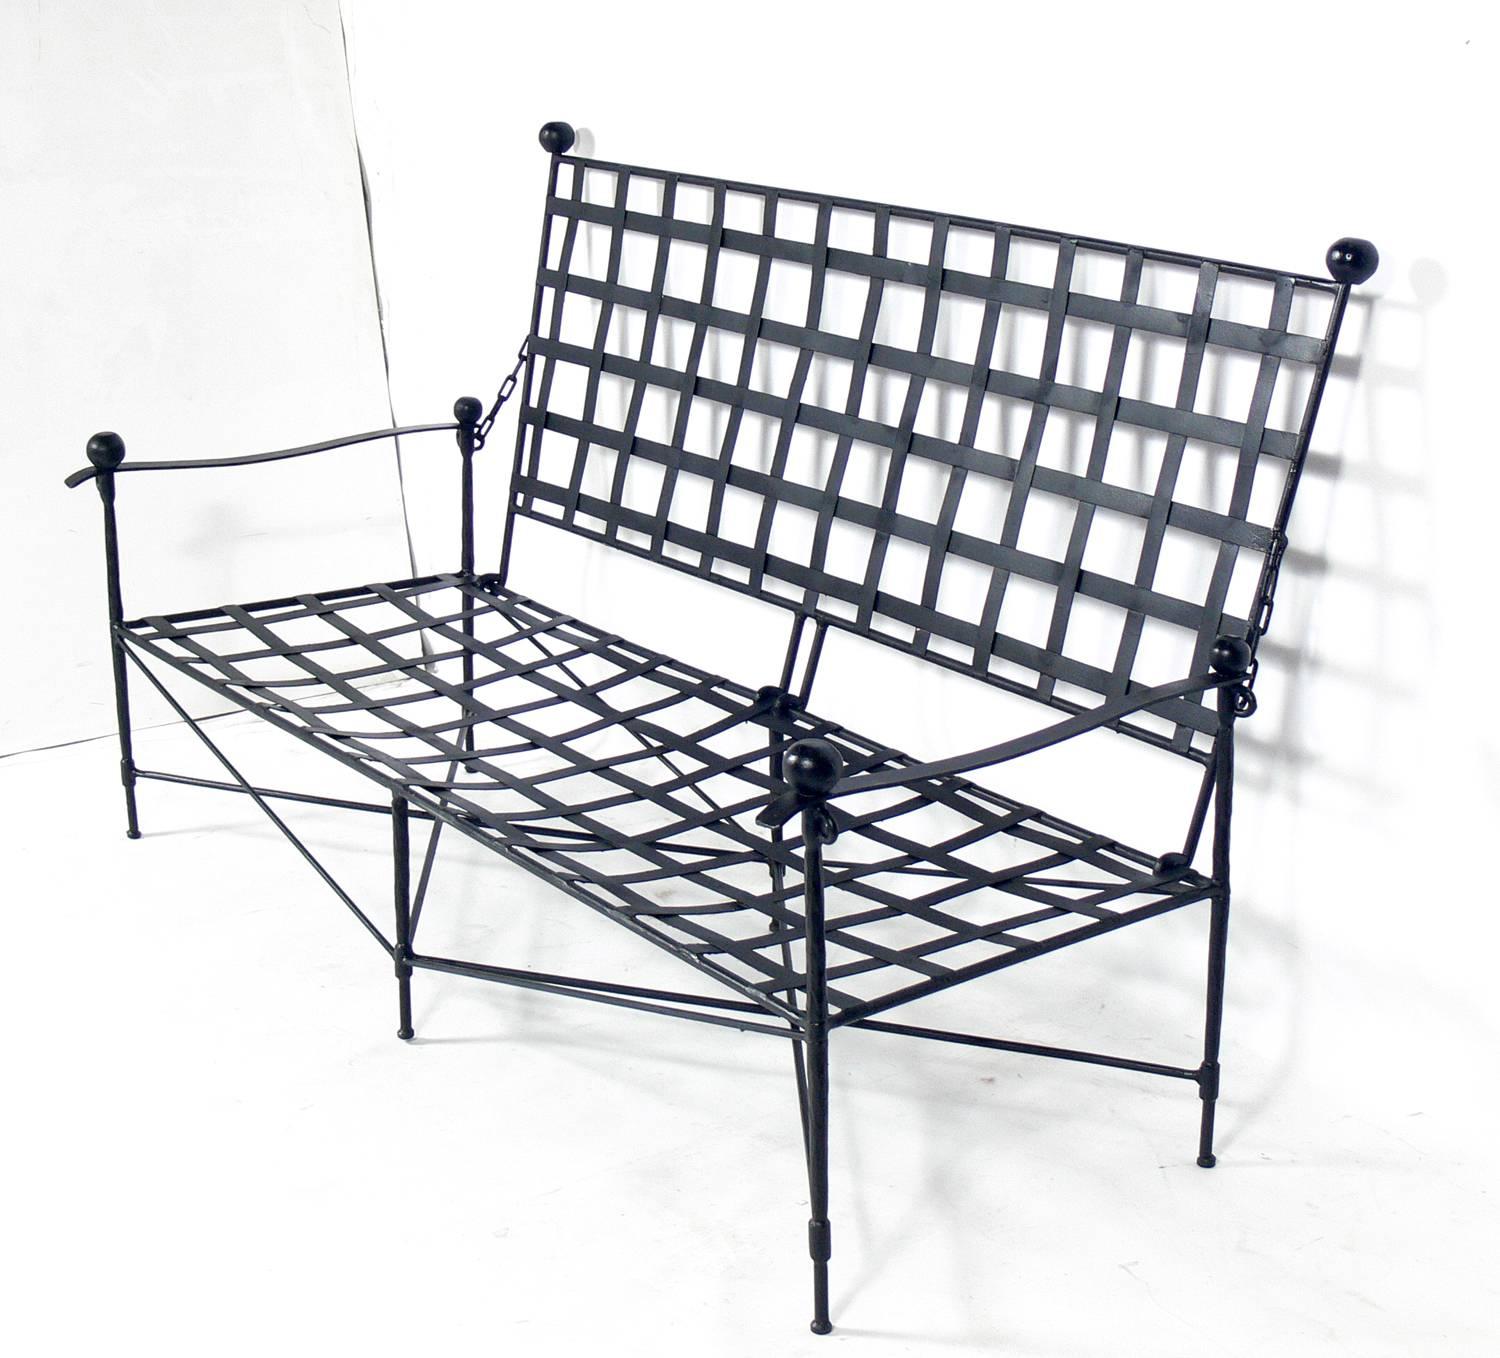 Sculptural iron patio set, in the style of Mario Papperzini, Italian, circa 1950s. This is a versatile form and it can be used indoors or outdoors. This sculptural chair design was used by Yves Saint Laurent in his personal residence at la Rue de